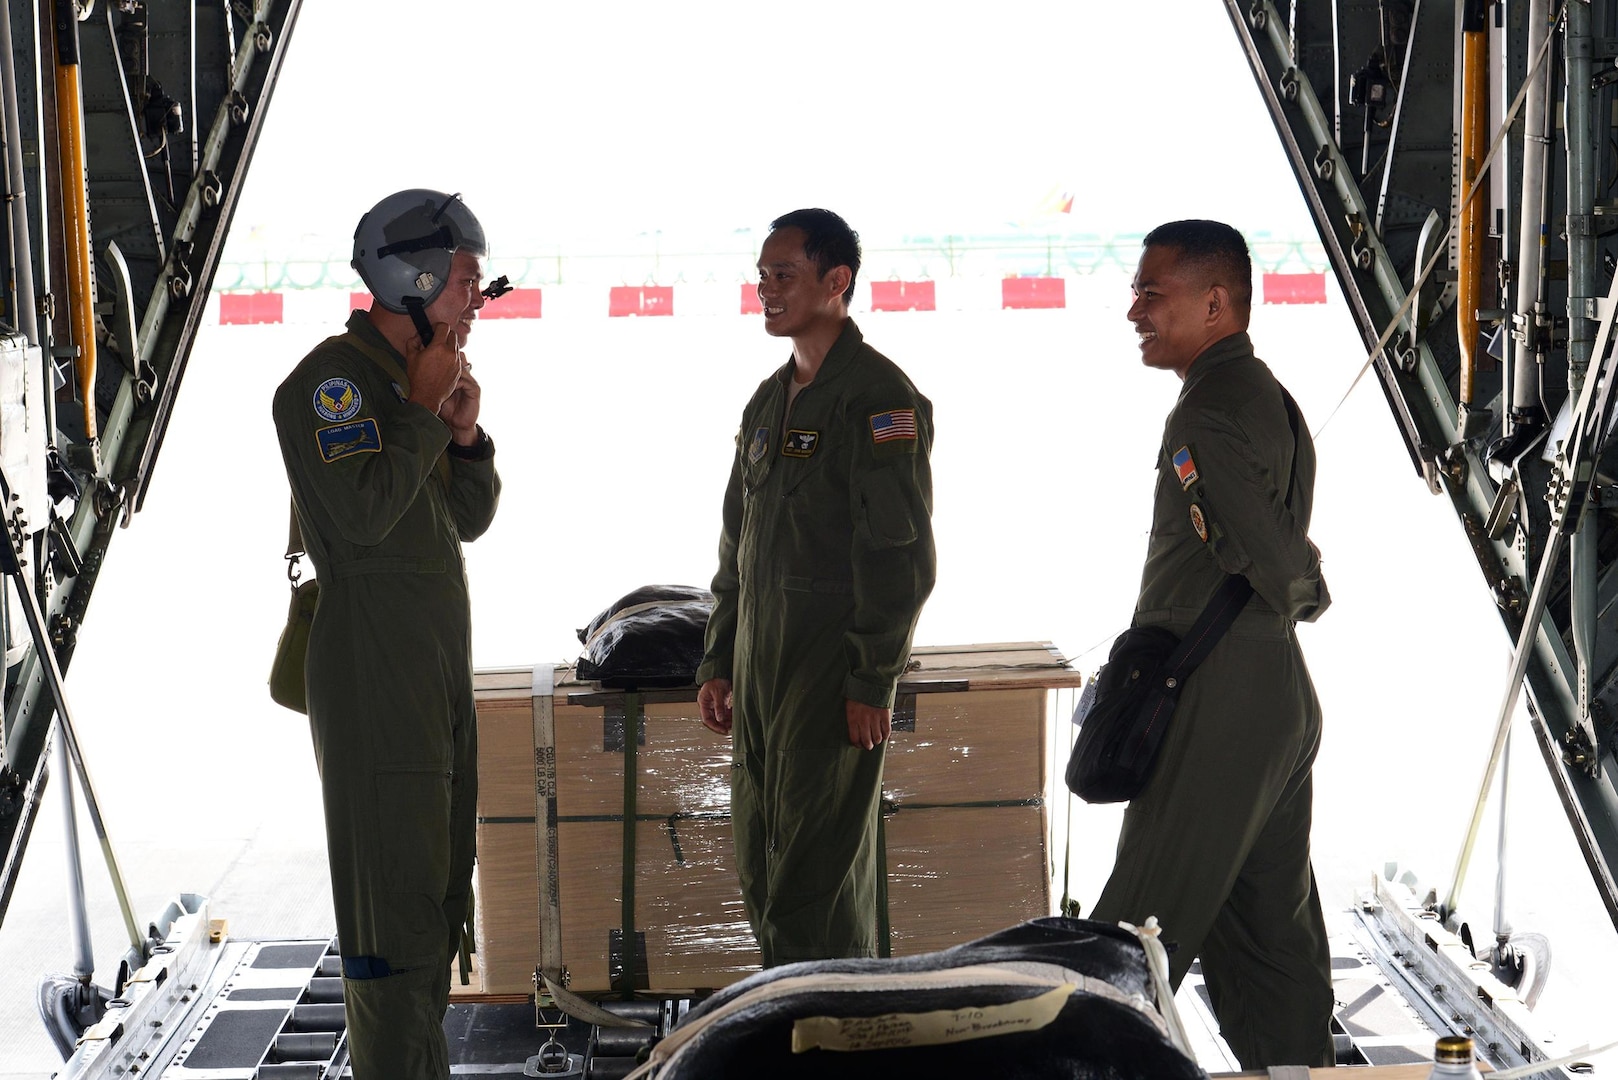 Philippine Air Force C-130 crew members prepare a U.S. Air Force C-130 Hercules aircraft for low-cost, low-altitude airdrop operations with U.S. Air Force Tech. Sgt. John Quiason (middle), 36th Airlift Squadron, 374th Airlift Wing, Yokota Air Base, Japan, during the current iteration of a rotational Air Contingent at Brigadier General Benito N Ebuen Air Base, Lapu-Lapu City, Philippines, Oct. 5, 2016. For the exchange, Yokota-based C-130s flew with members of the Philippine Air Force's 220th Airlift Wing, from Brig. Gen. Benito N. Ebuen Air Base, Lapu-Lapu City, Philippines, and discussed the intricacies of LCLA bundle drops. Two Yokota-based C-130s and crews, members of the 36th Contingency Response Group, Andersen Air Force Base, Guam, and other units from across U.S. Pacific Command conducted bilateral training missions and subject matter expert exchanges alongside their Philippine Air Force counterparts. The Air Contingent is helping build the capacity of the Philippine Air Force and increases joint training, promotes interoperability and provides greater and more transparent air and maritime situational awareness to ensure safety for military and civilian activities in international waters and airspace. Its missions include air and maritime domain awareness, personnel recovery, combating piracy, and assuring access to the air and maritime domains in accordance with international law.